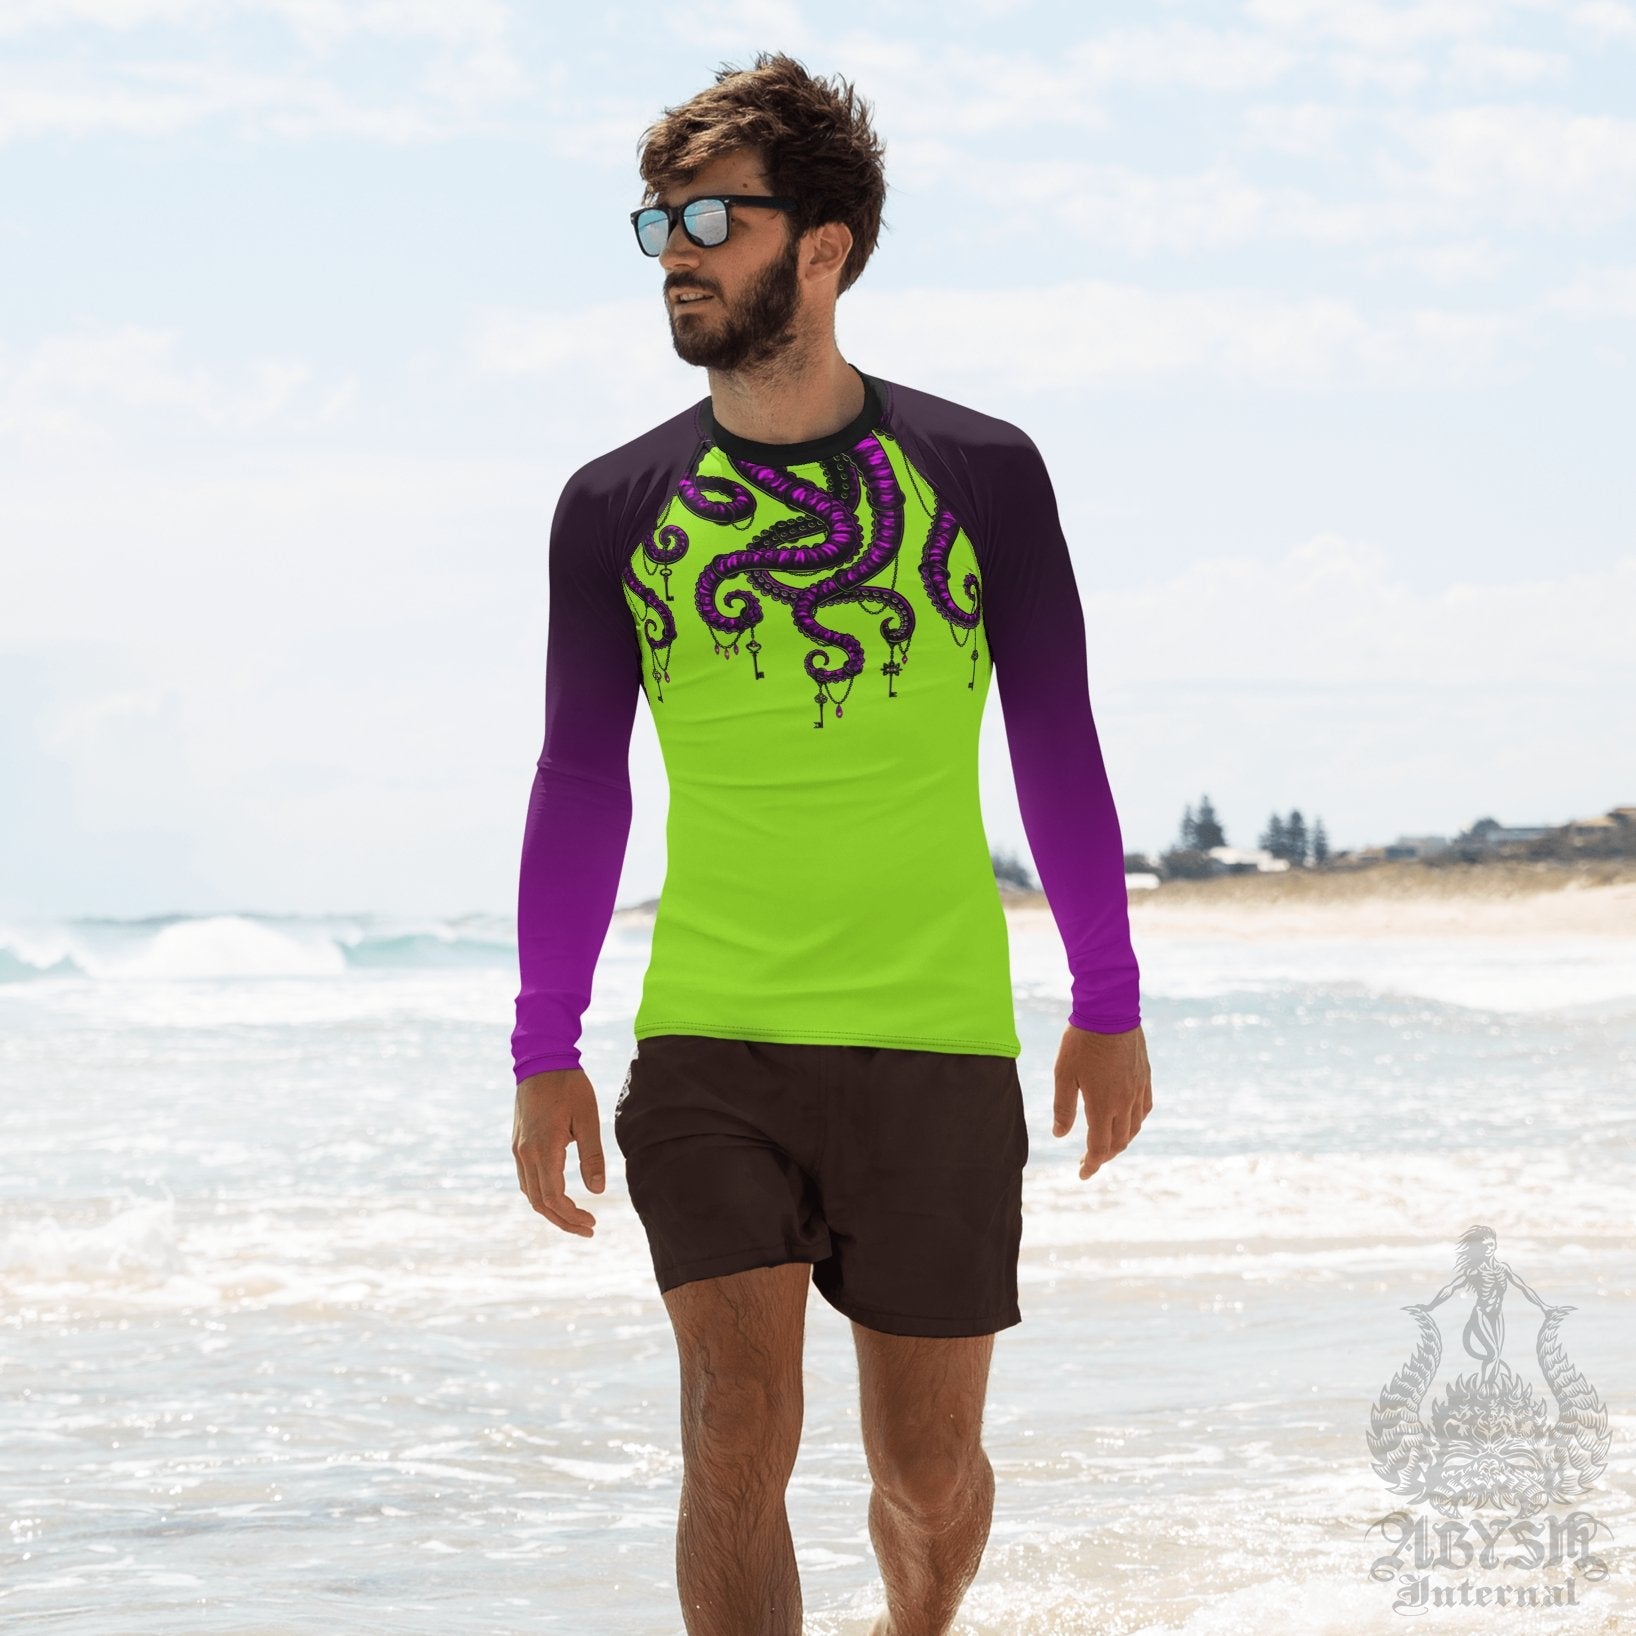 Green and Purple Men's Rash Guard, Long Sleeve spandex shirt for surfing,  swimwear top for water sports - Octopus